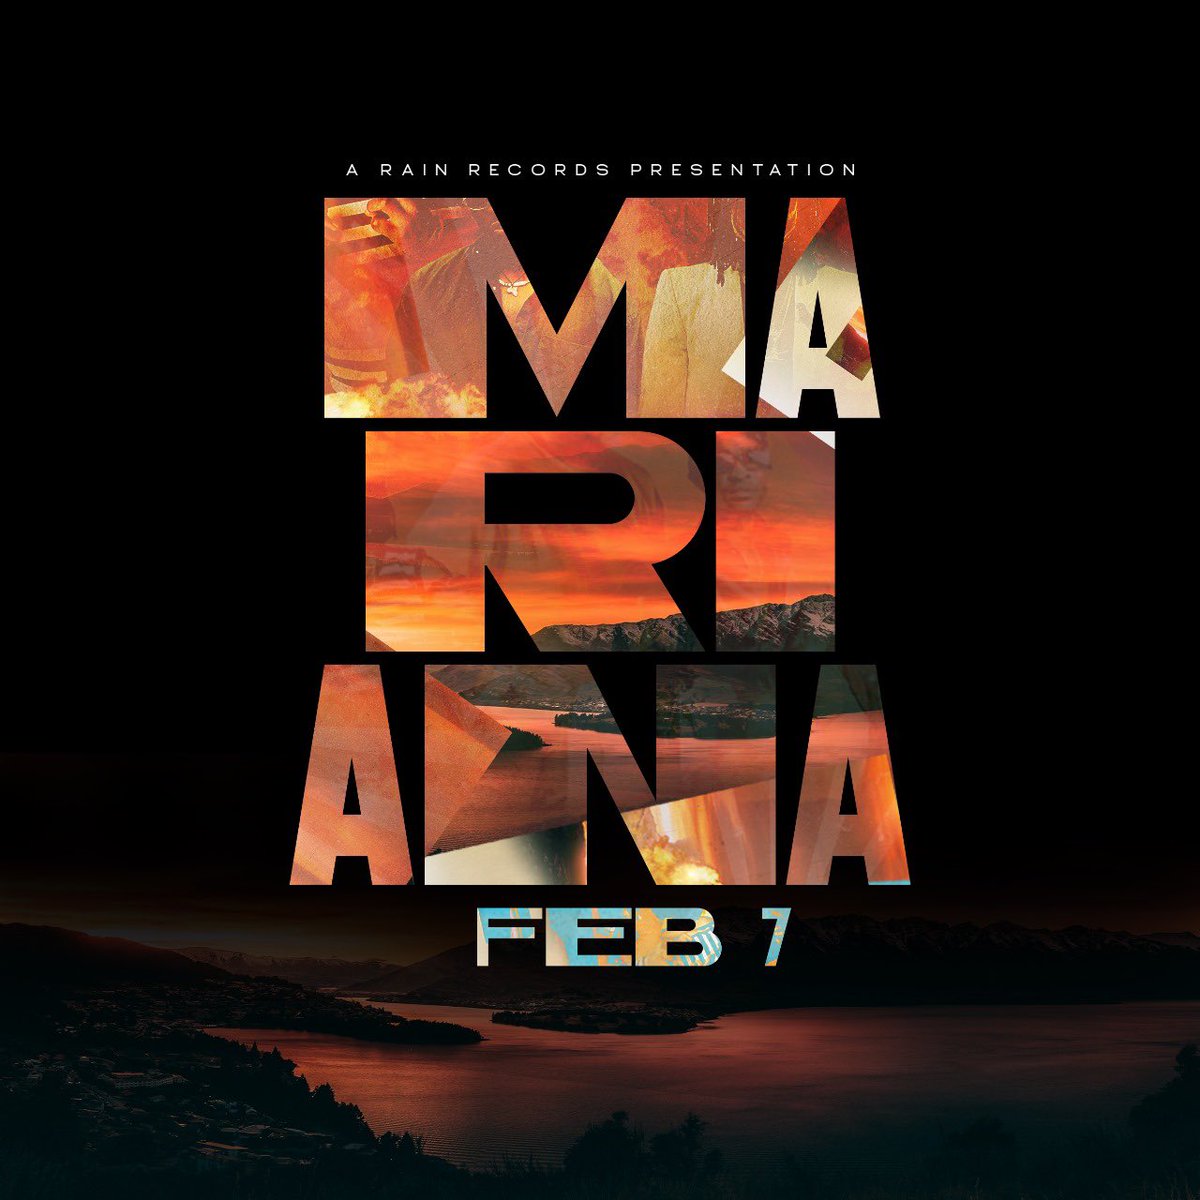 Something special for YOU this Valentines season… Feb 7 #Mariana